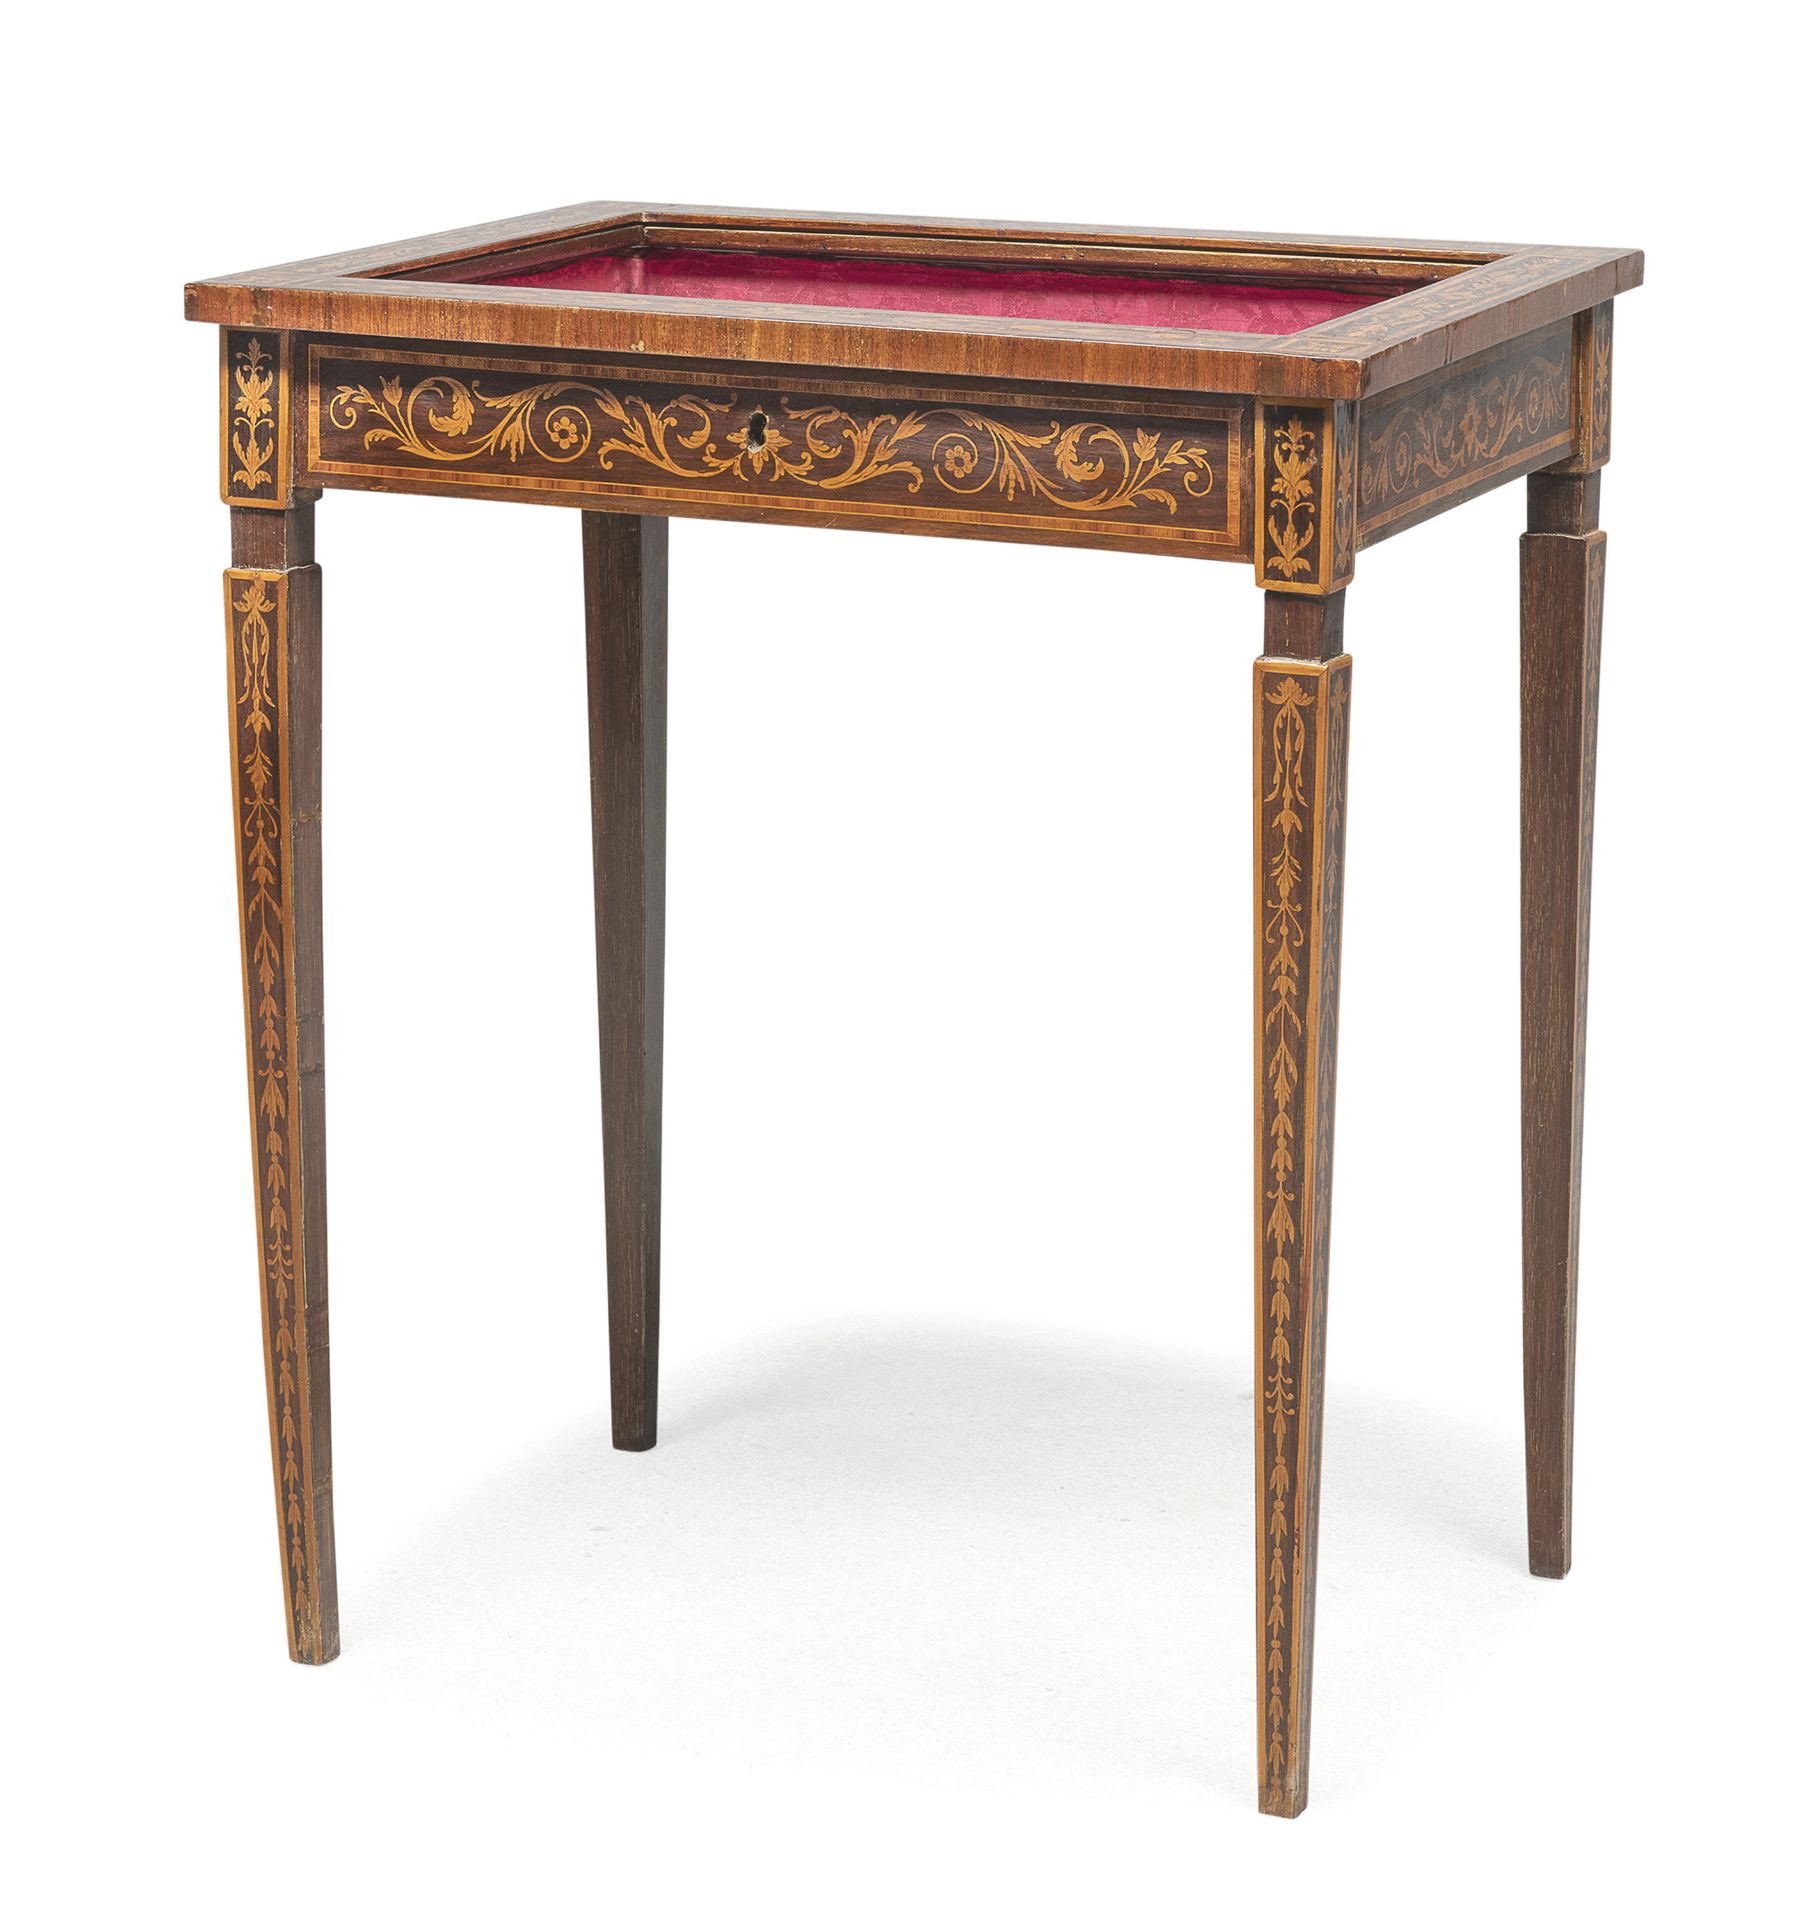 SHOWCASE TABLE IN PURPLE EBONY LOUIS XVI STYLE END OF THE 19TH CENTURY